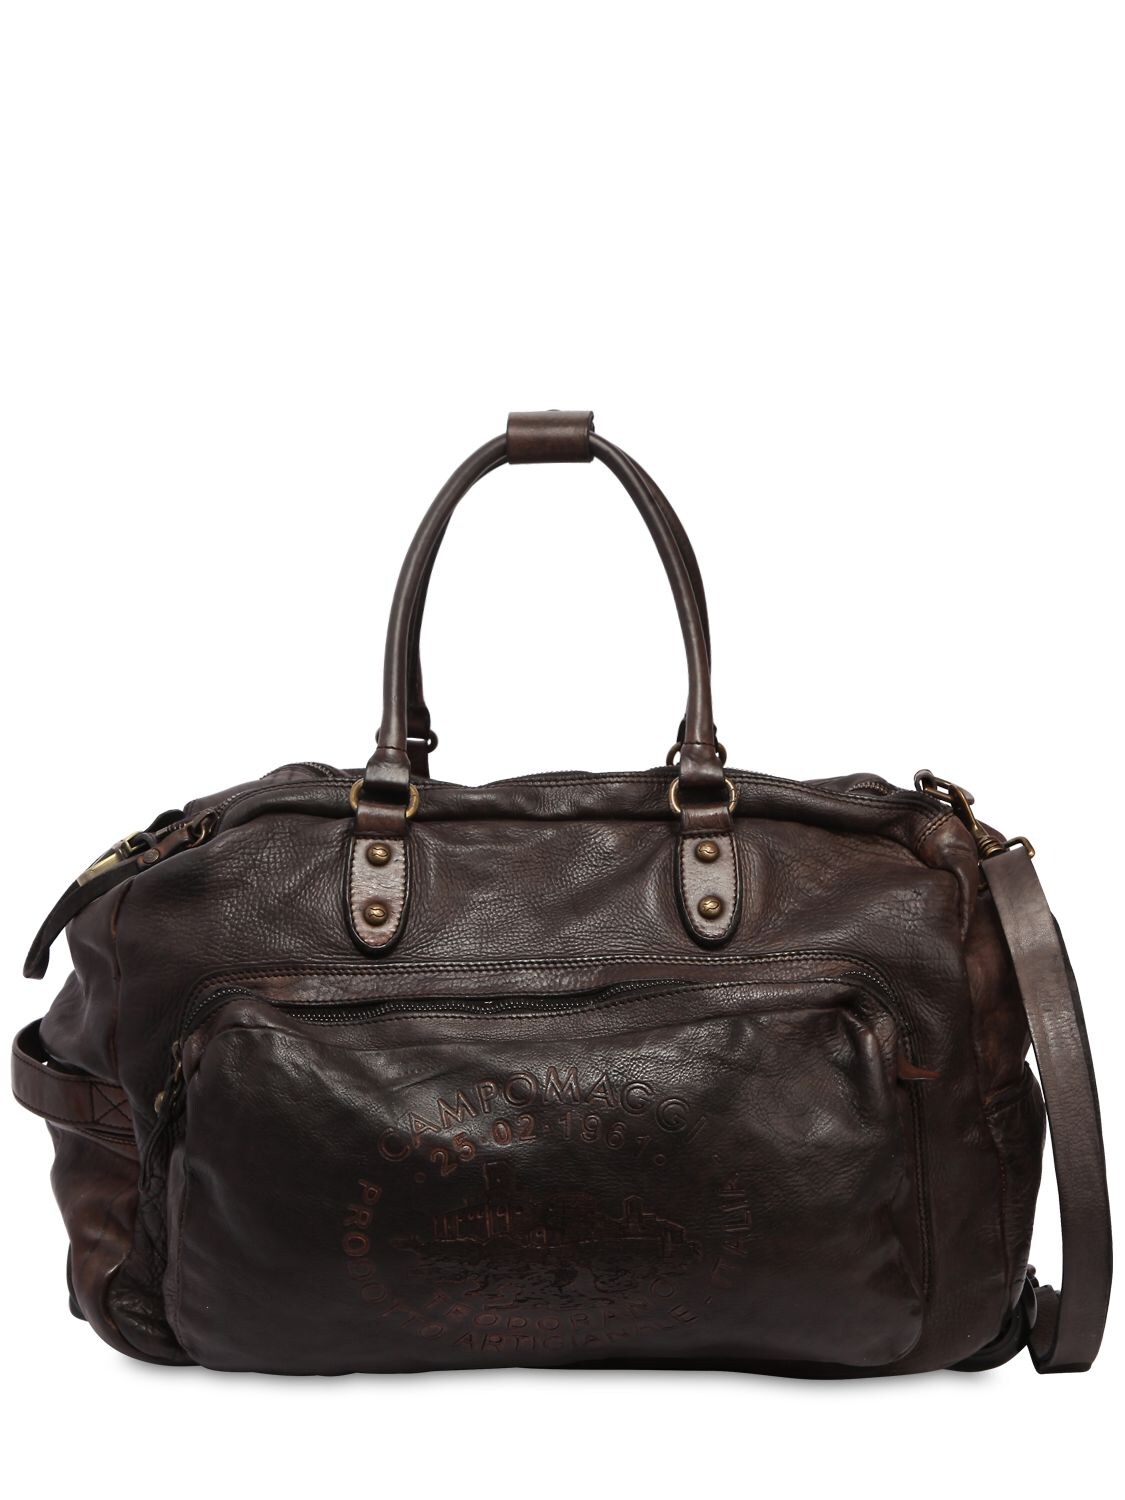 Campomaggi Leather Duffle Bag Trolley In Grey Brown